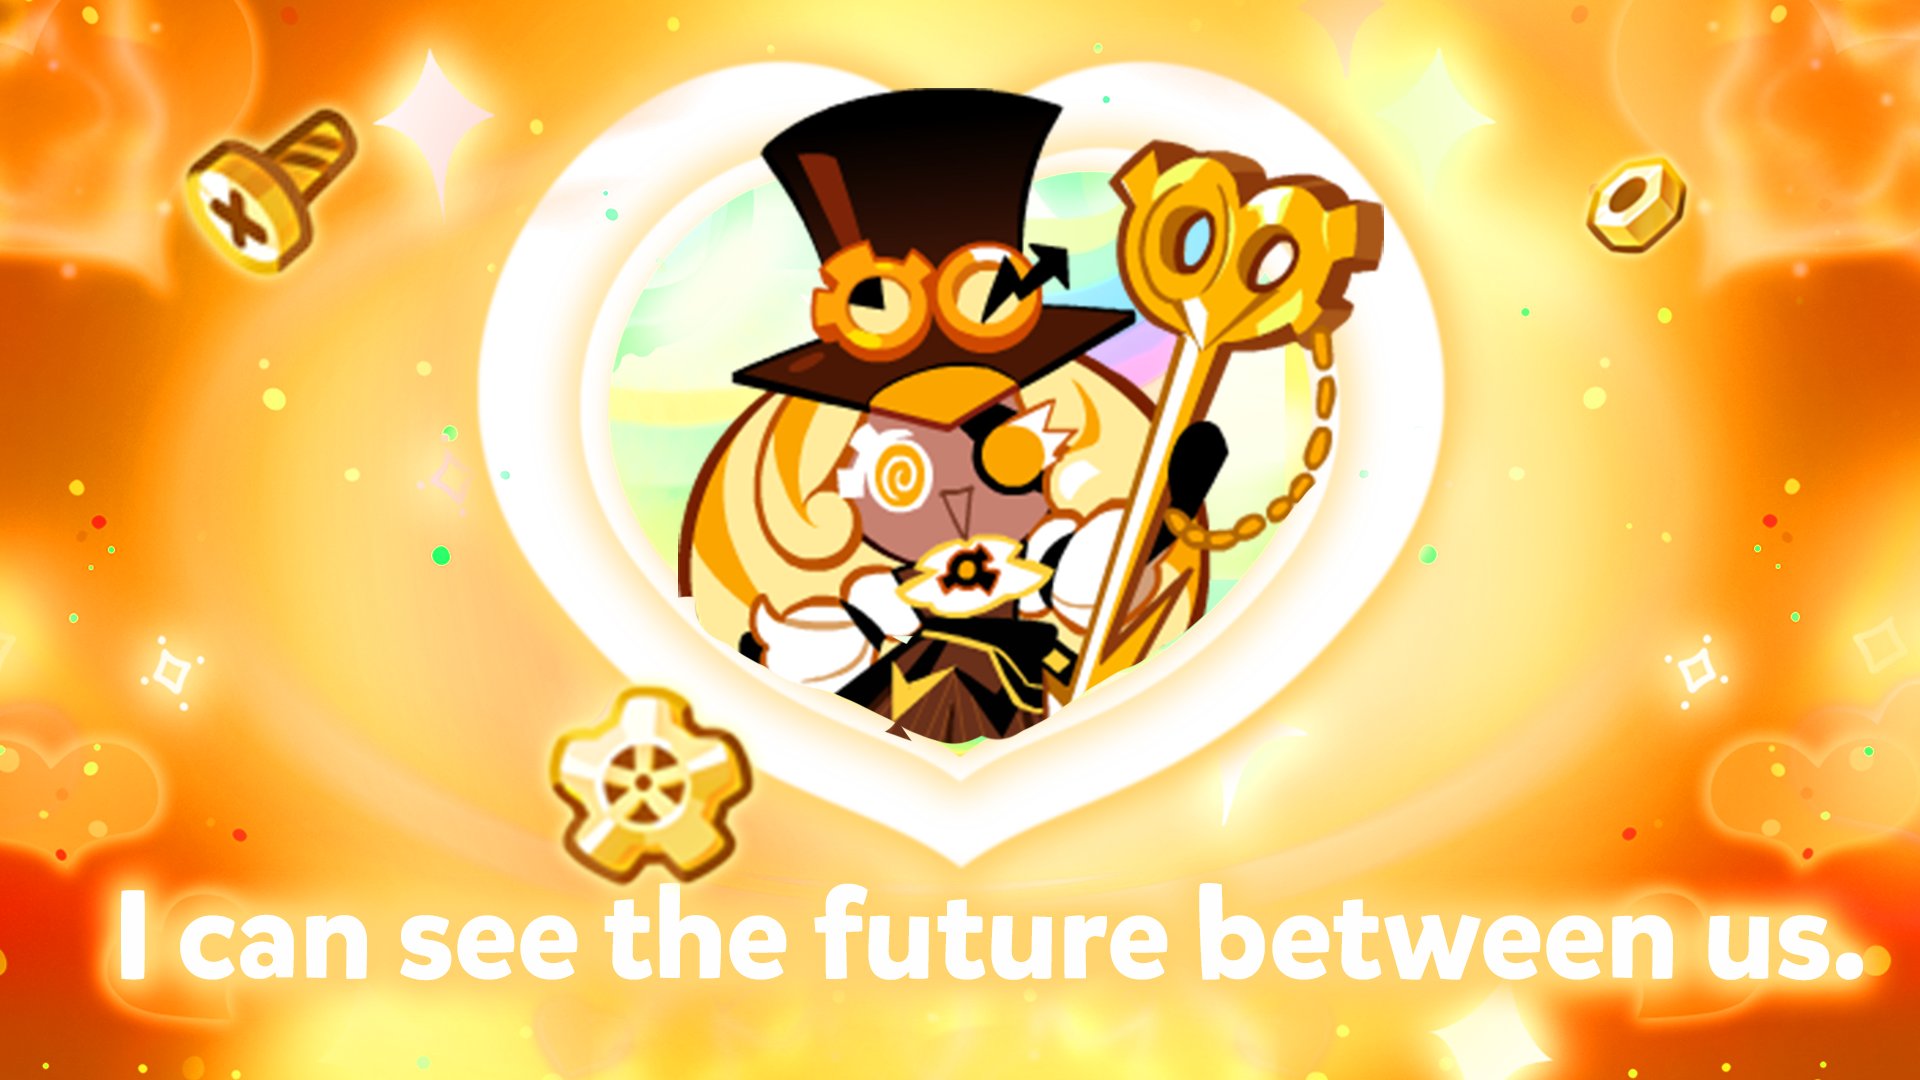 So I translated one of the Cookie Run Love Test questions